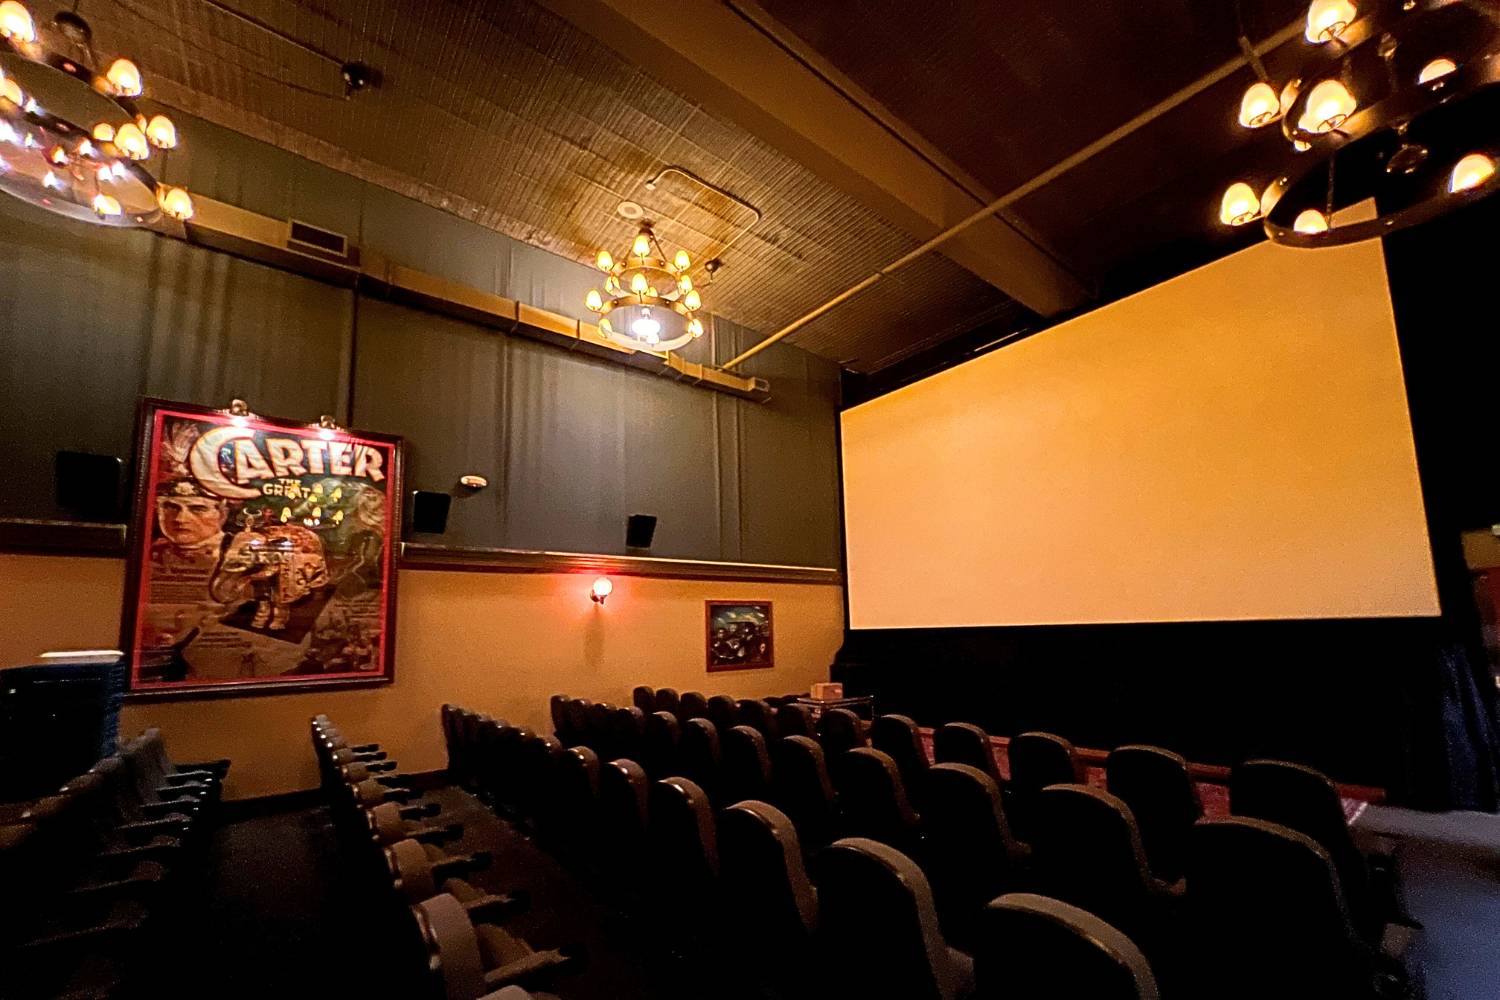 Interior shot of a movie theater